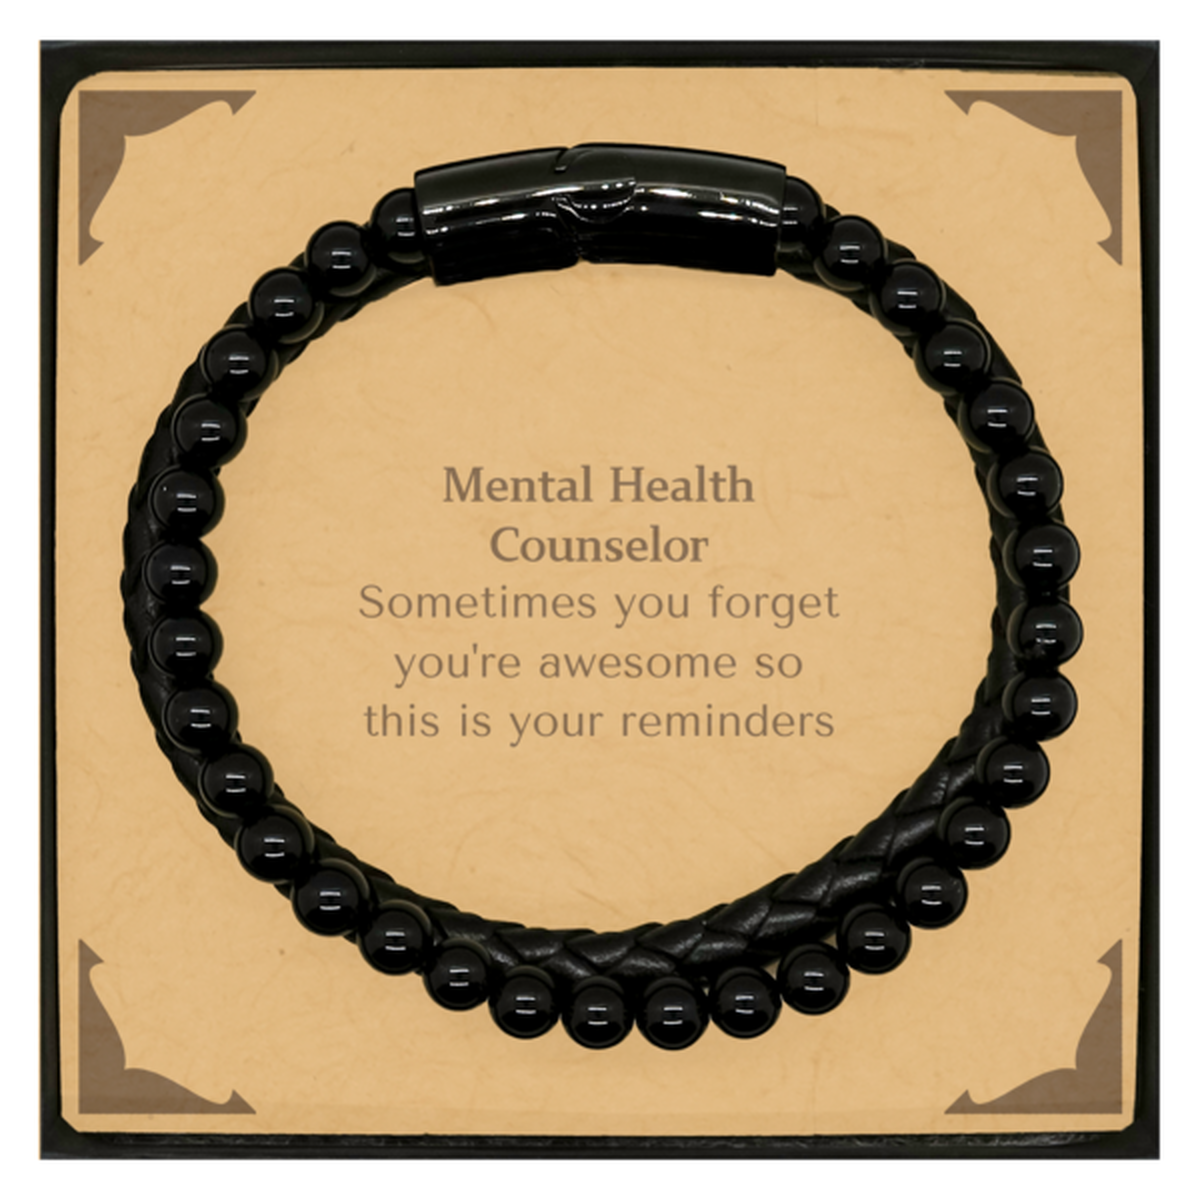 Sentimental Mental Health Counselor Stone Leather Bracelets, Mental Health Counselor Sometimes you forget you're awesome so this is your reminders, Graduation Christmas Birthday Gifts for Mental Health Counselor, Men, Women, Coworkers